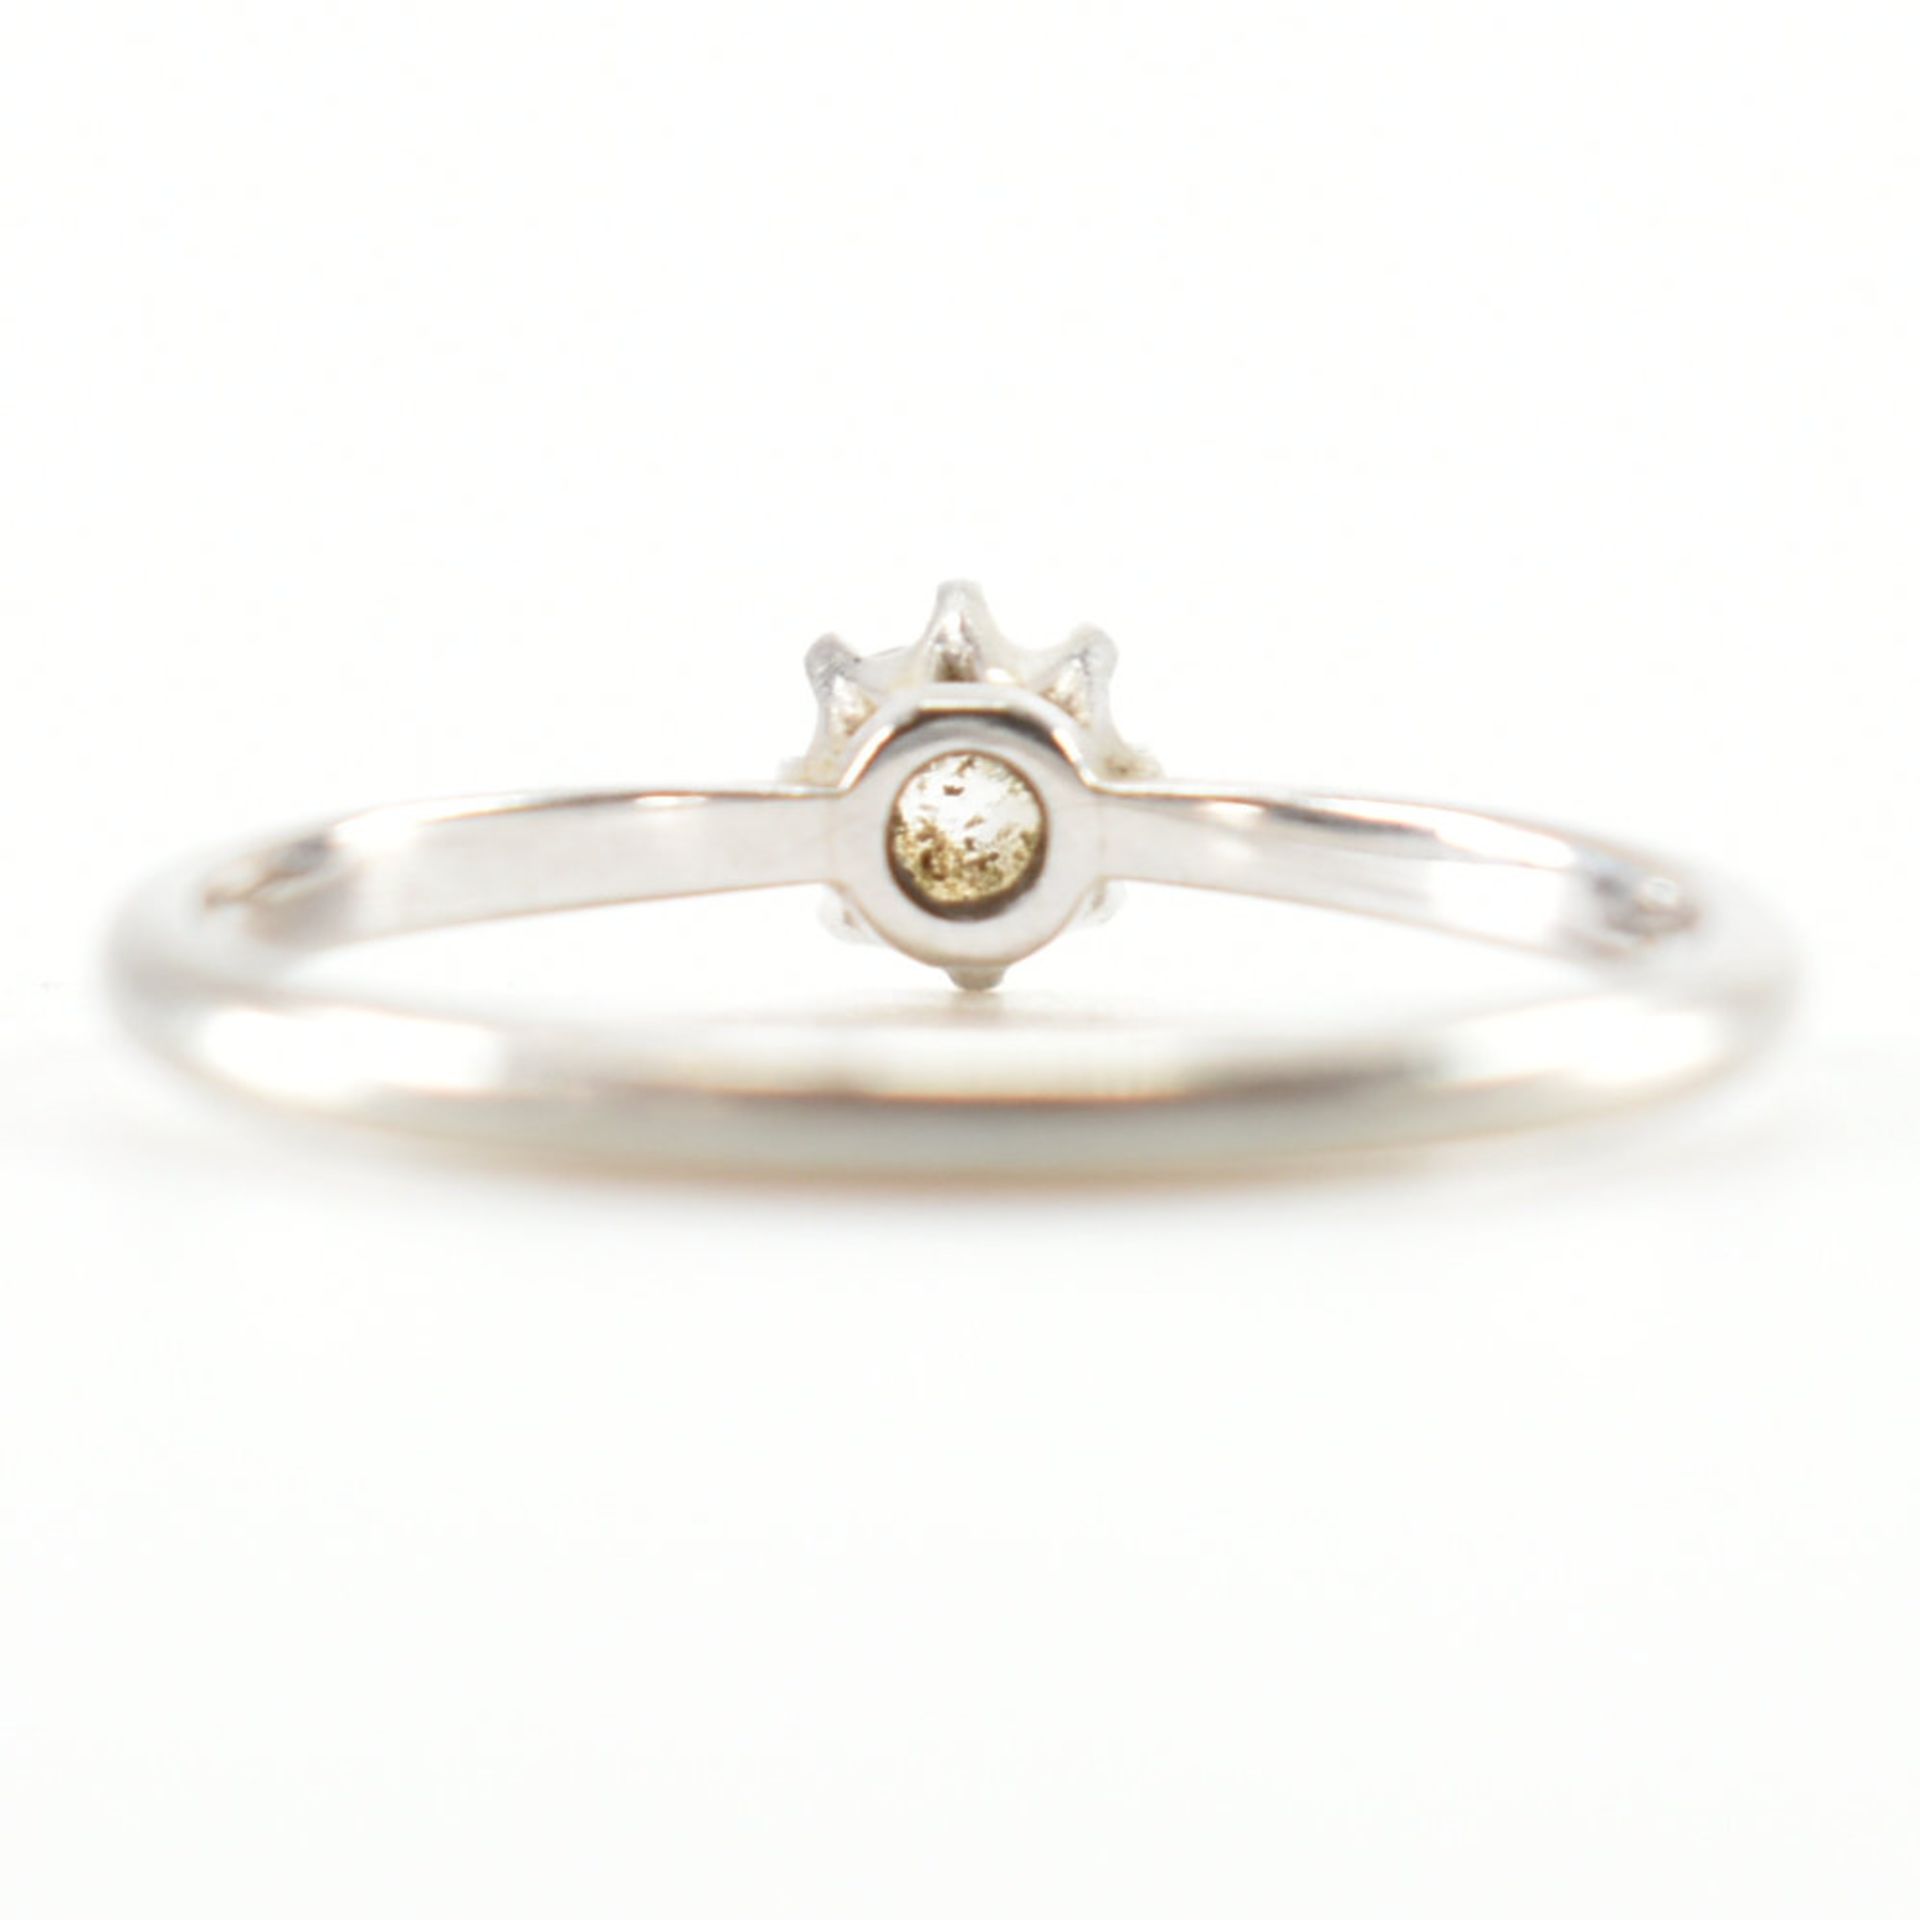 18CT WHITE GOLD & DIAMOND SOLITAIRE RING - Image 5 of 9